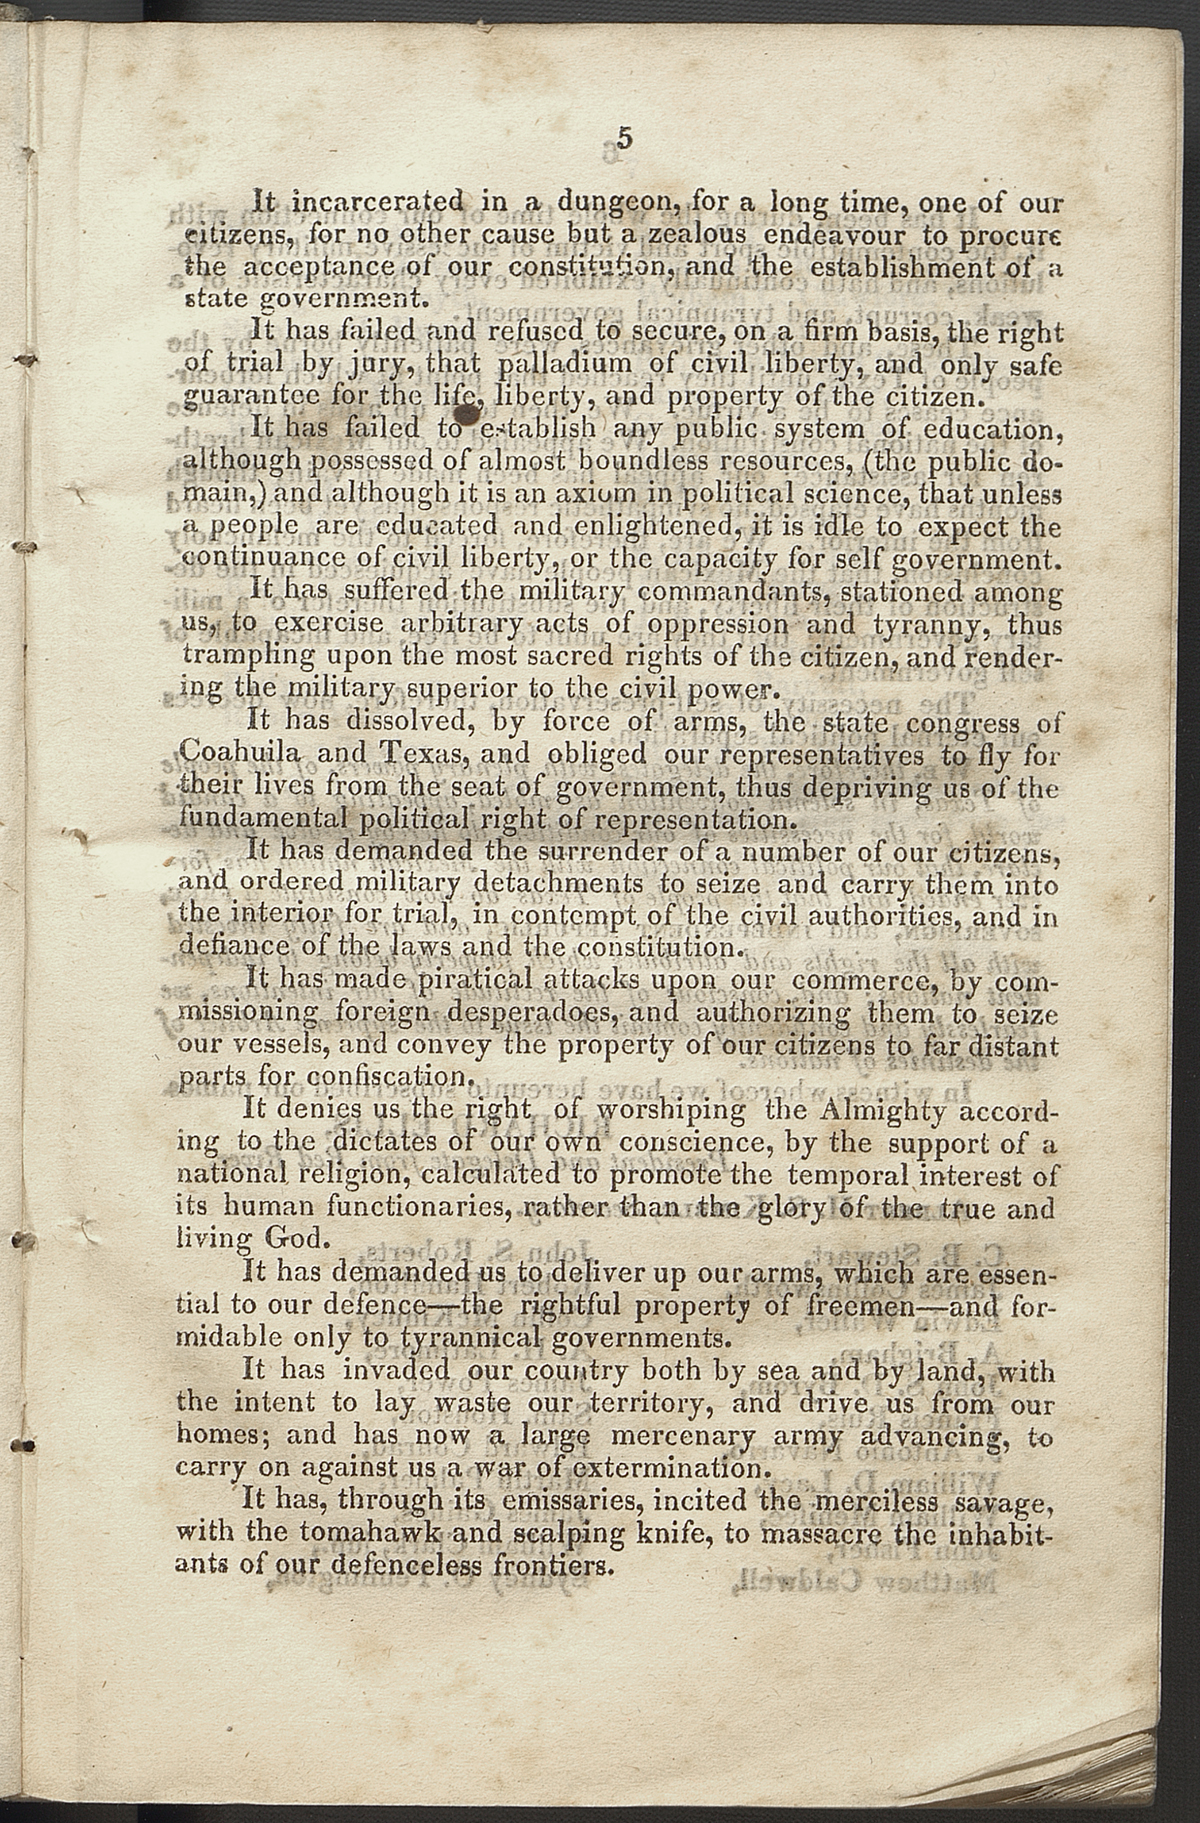 Declaration of Independence, page 5